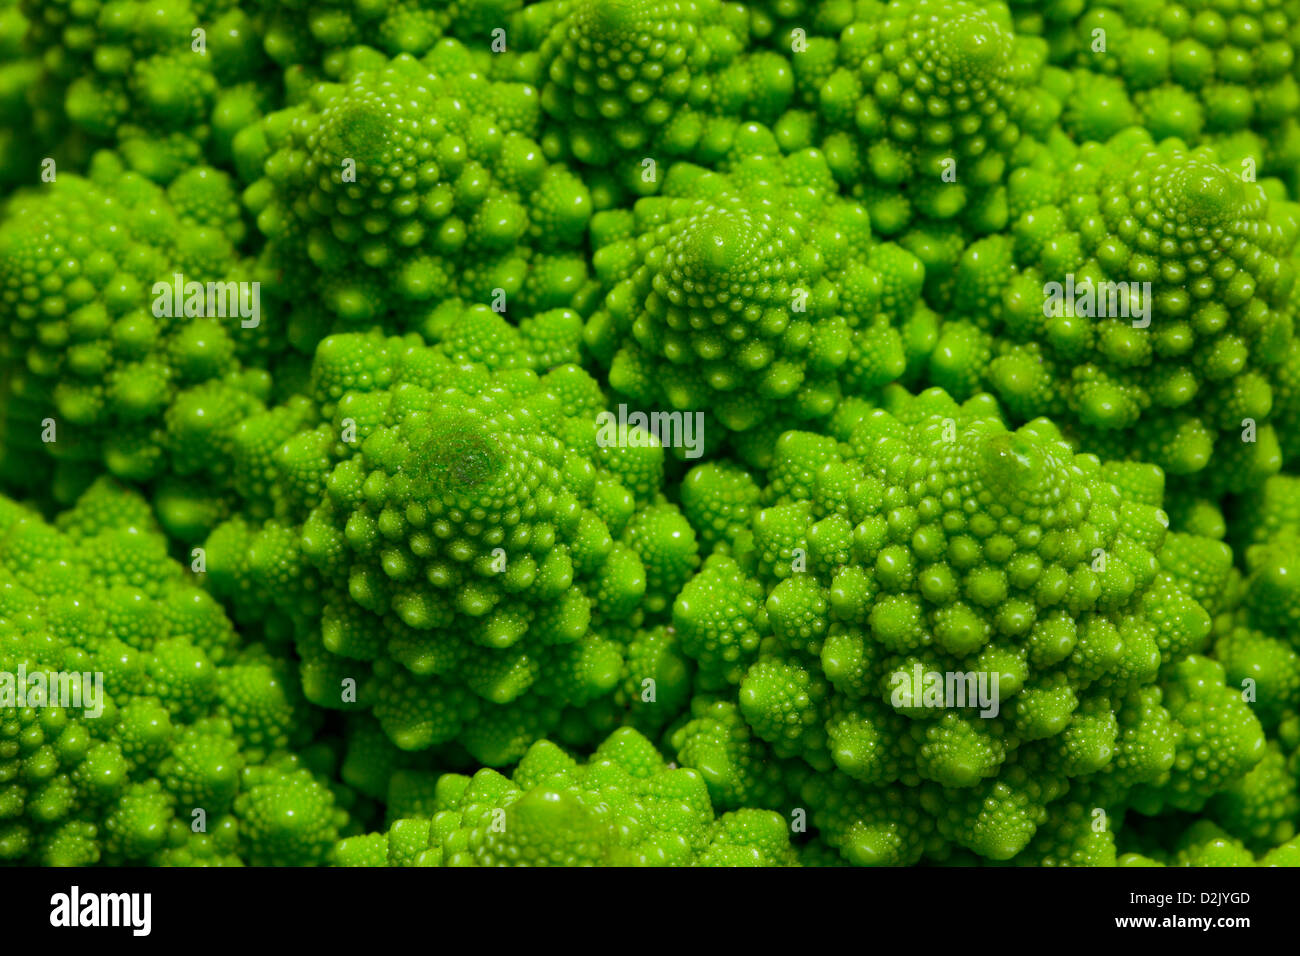 Romanesco broccoli cabbage marco. Nature fractal surface with spital pattern. Stock Photo